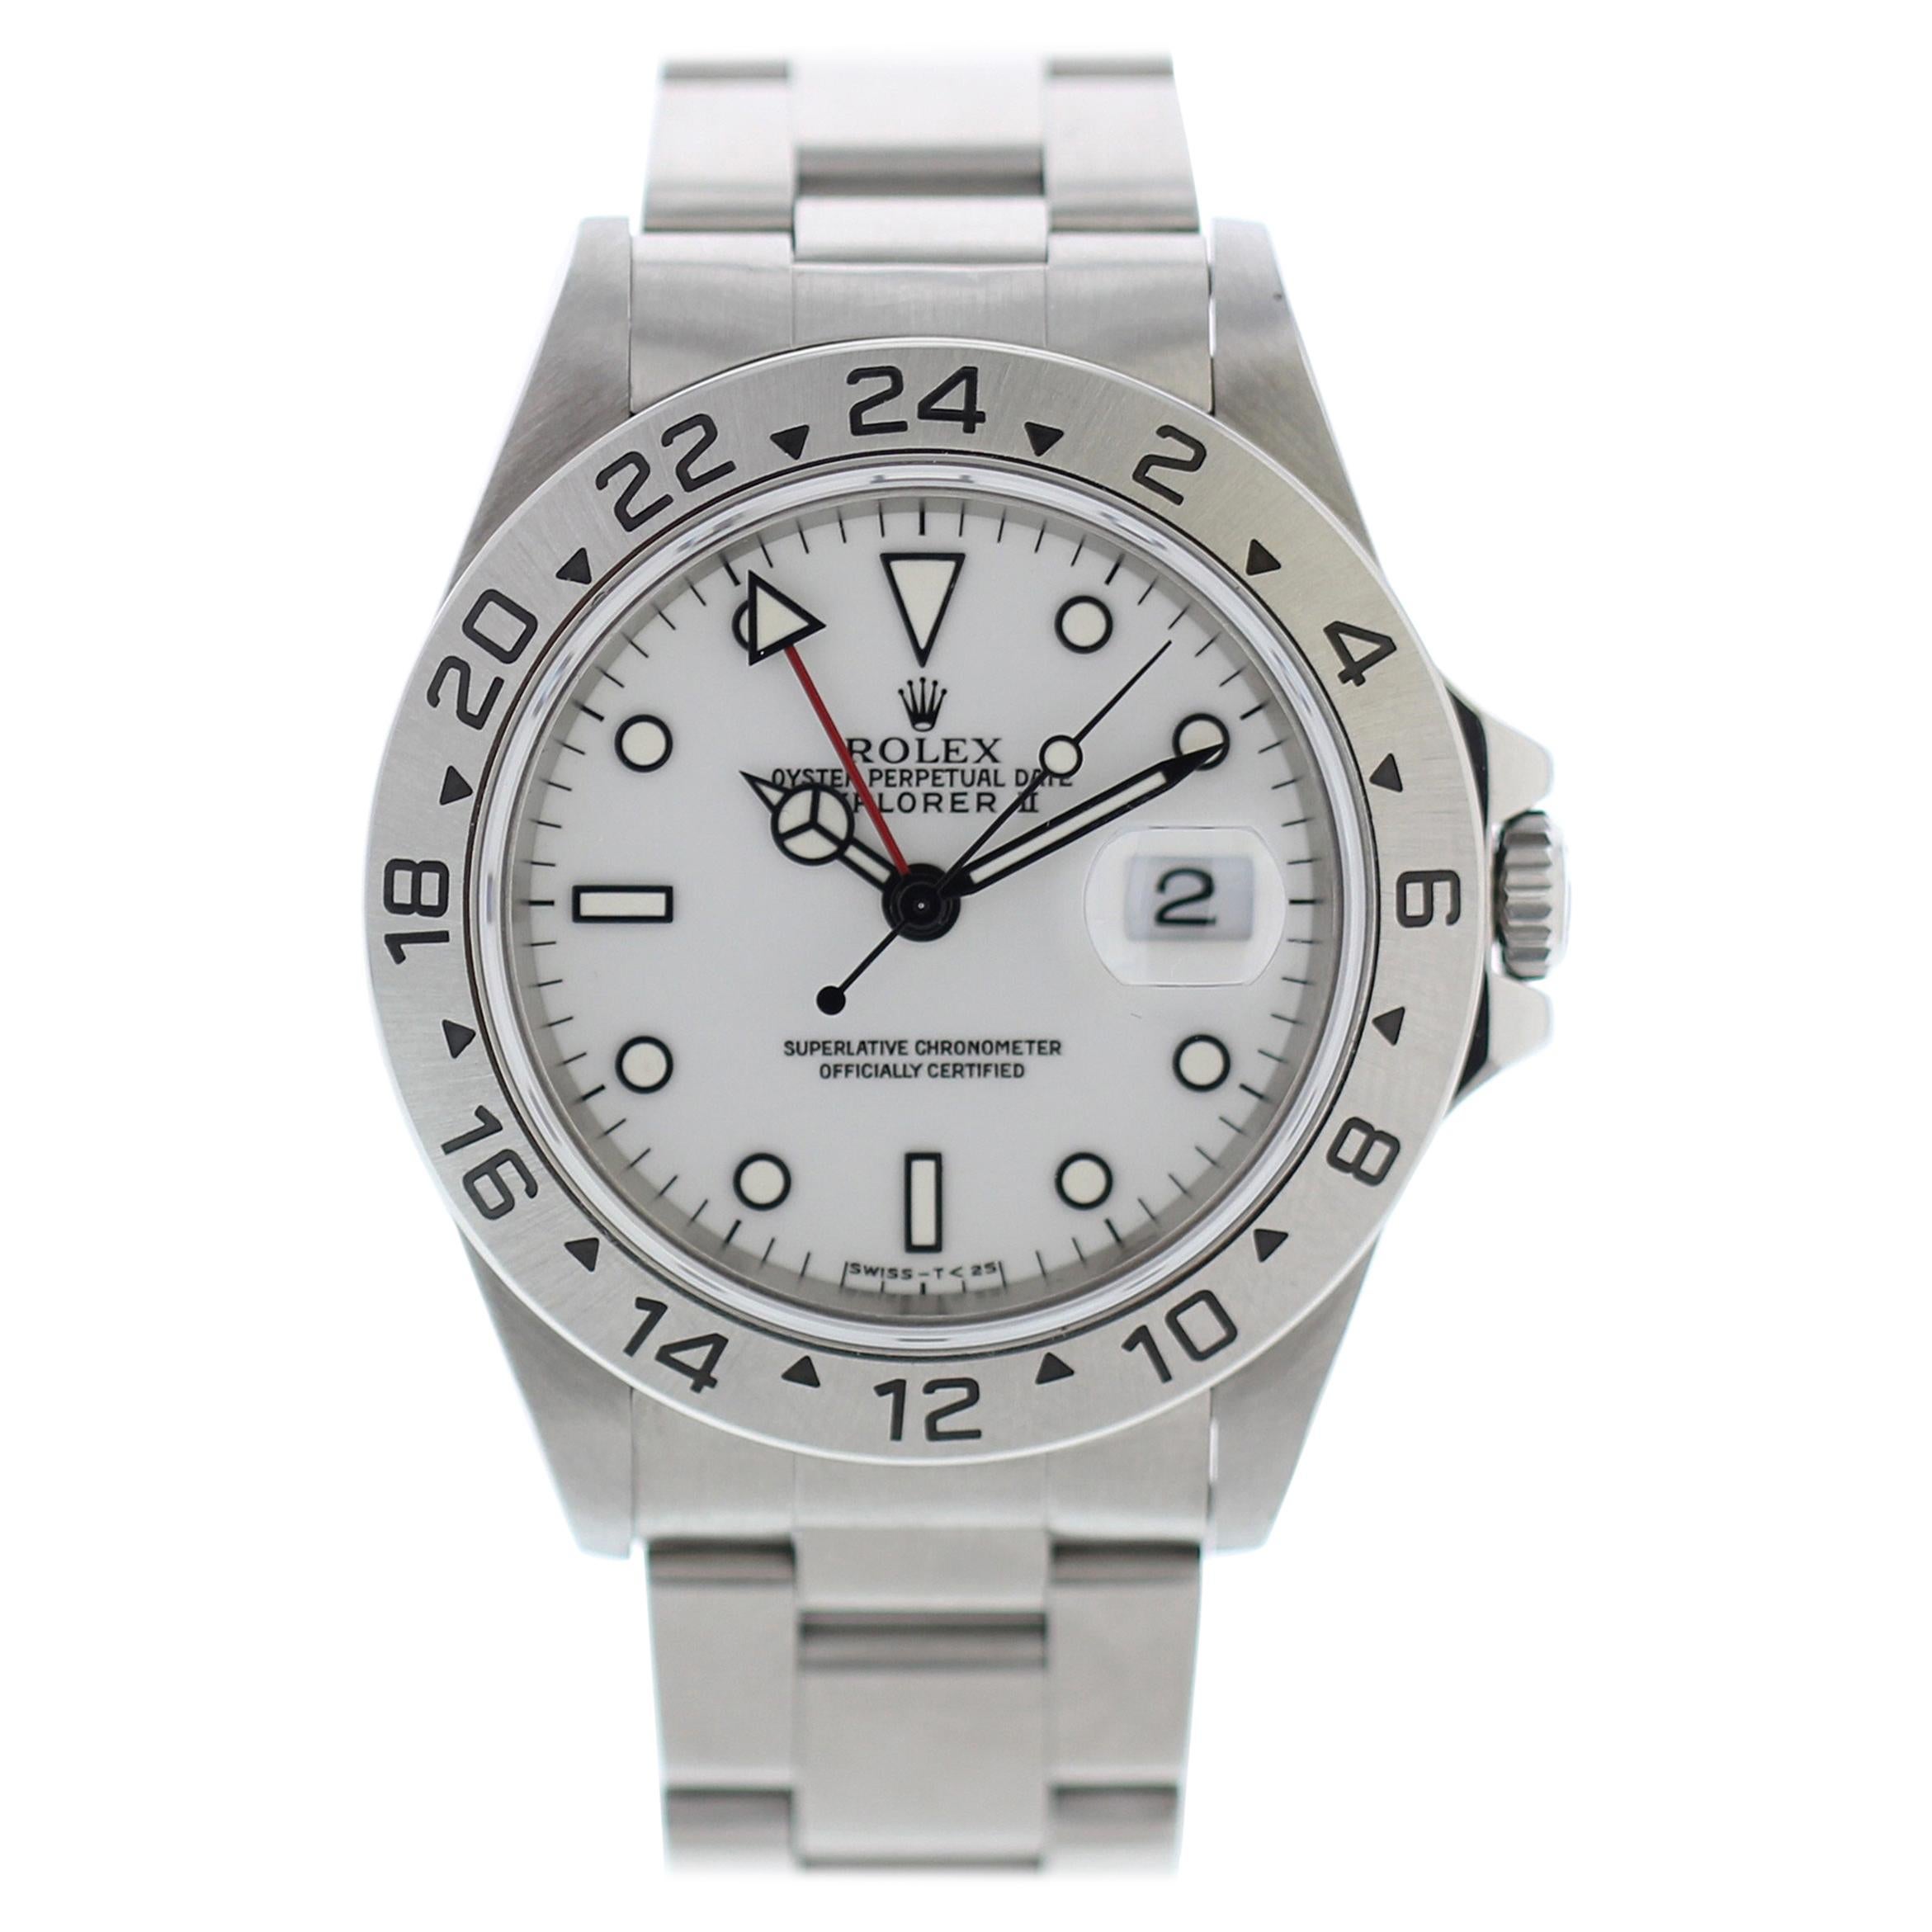 Rolex Explorer II 16570 Stainless Steel Tritium White Dial For Sale